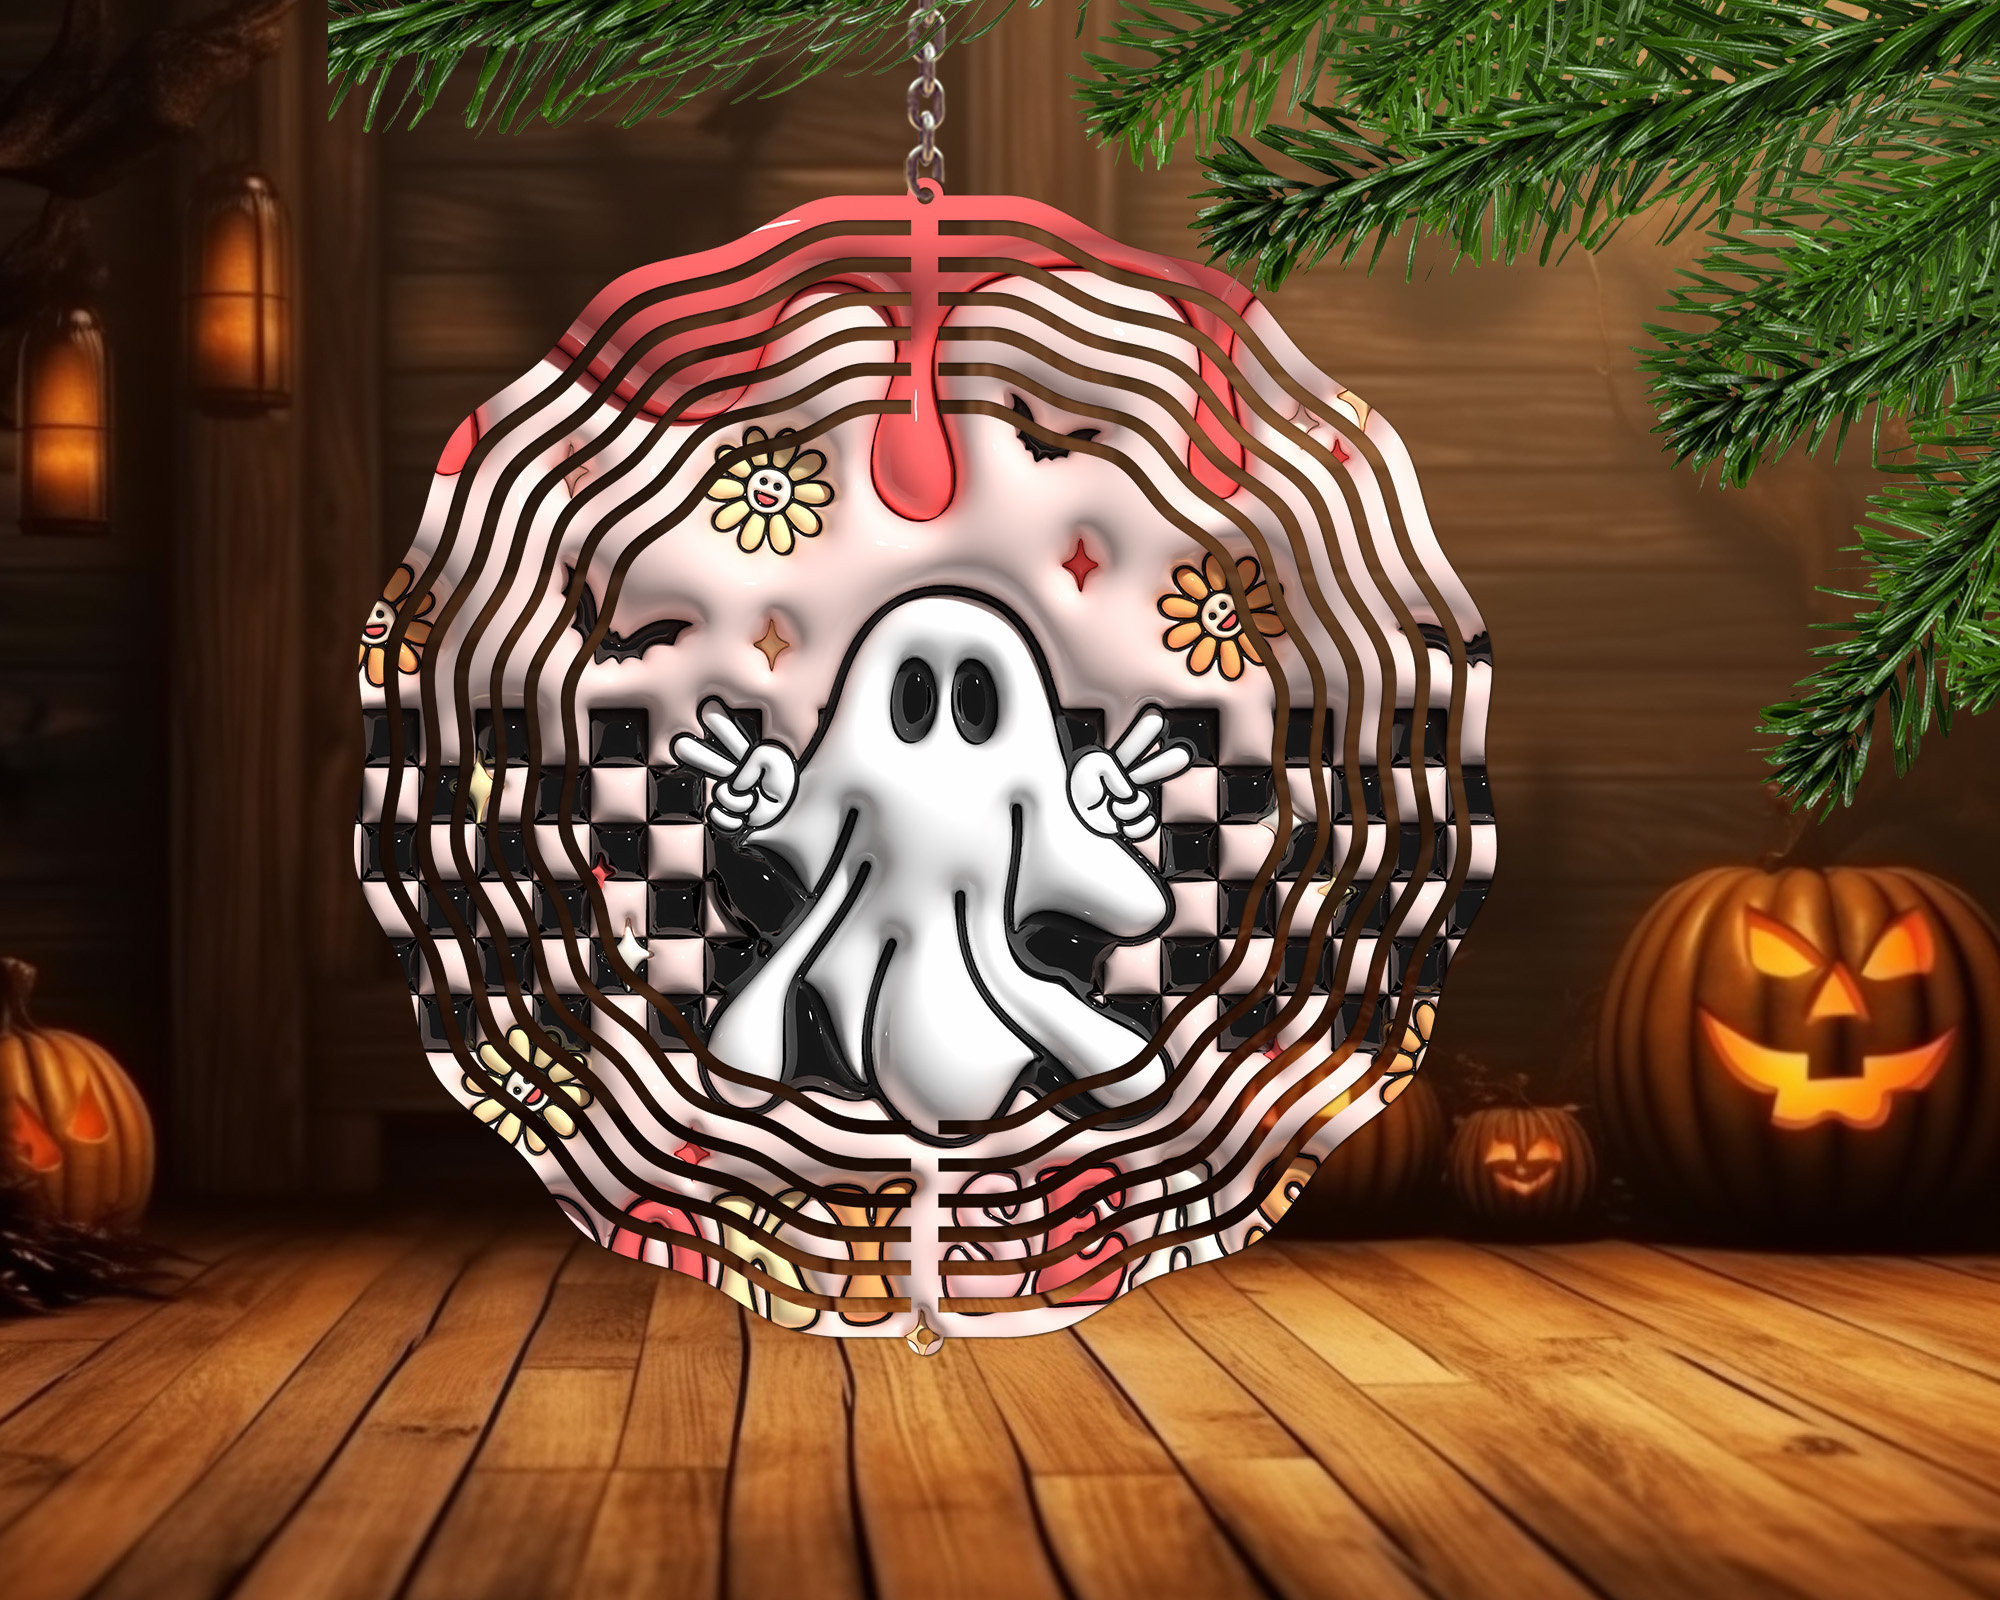 3D Inflated Spooky Season Wind Spinner For Yard And Garden, Outdoor Garden Yard Decoration, Garden Decor, Chime Art Gift